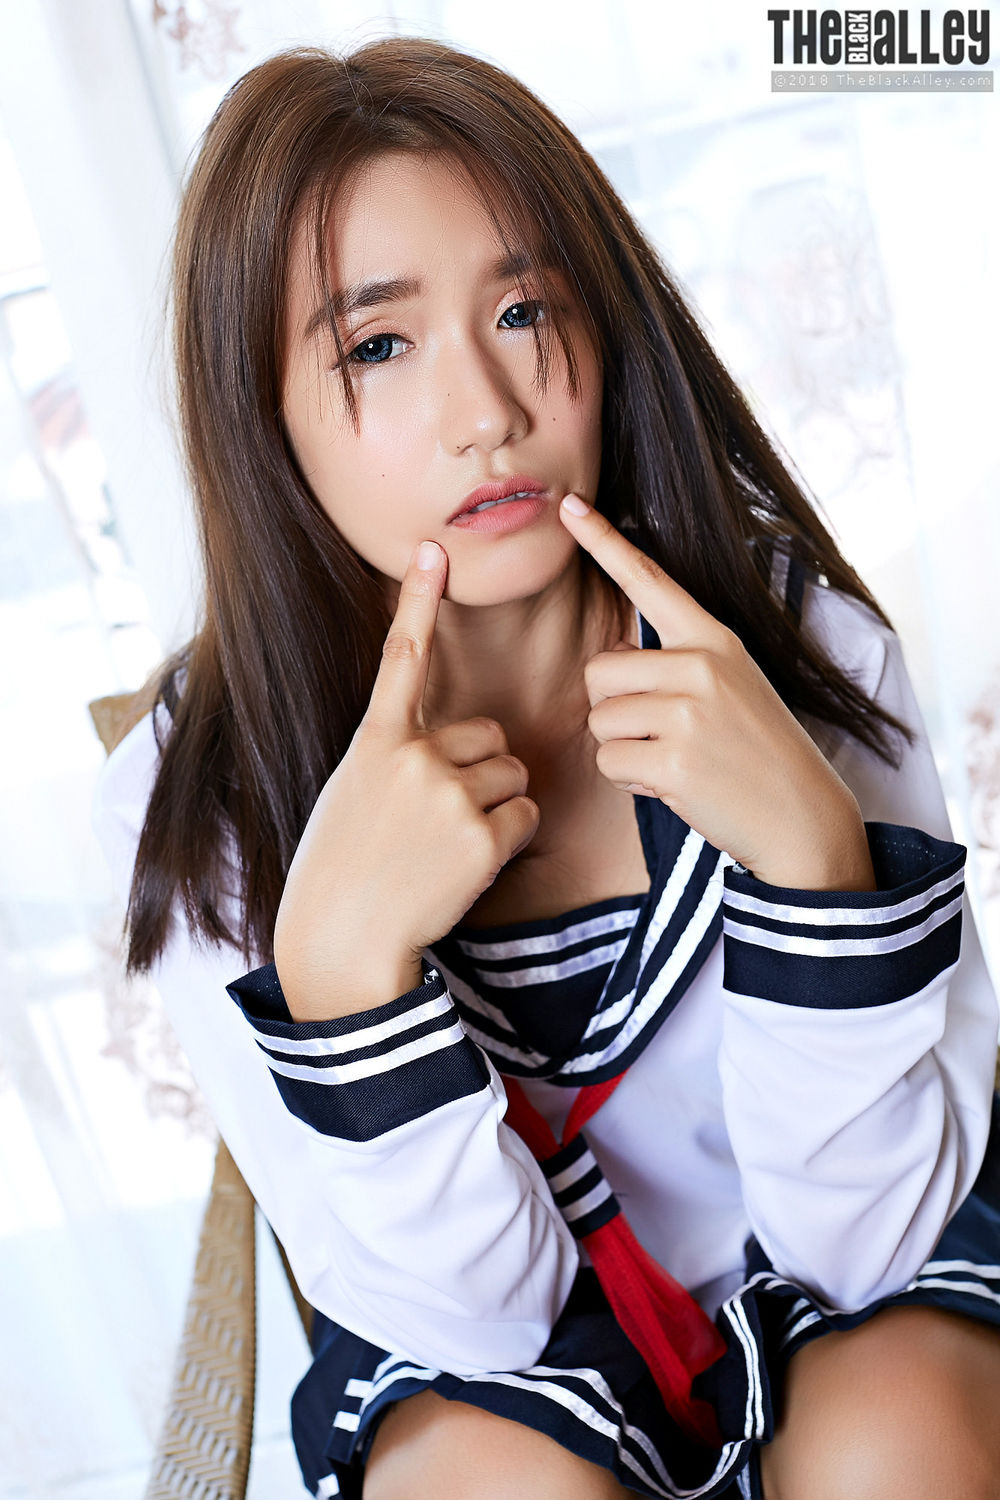 [The Black Alley] Chia Ling Set.05 2019.07.03